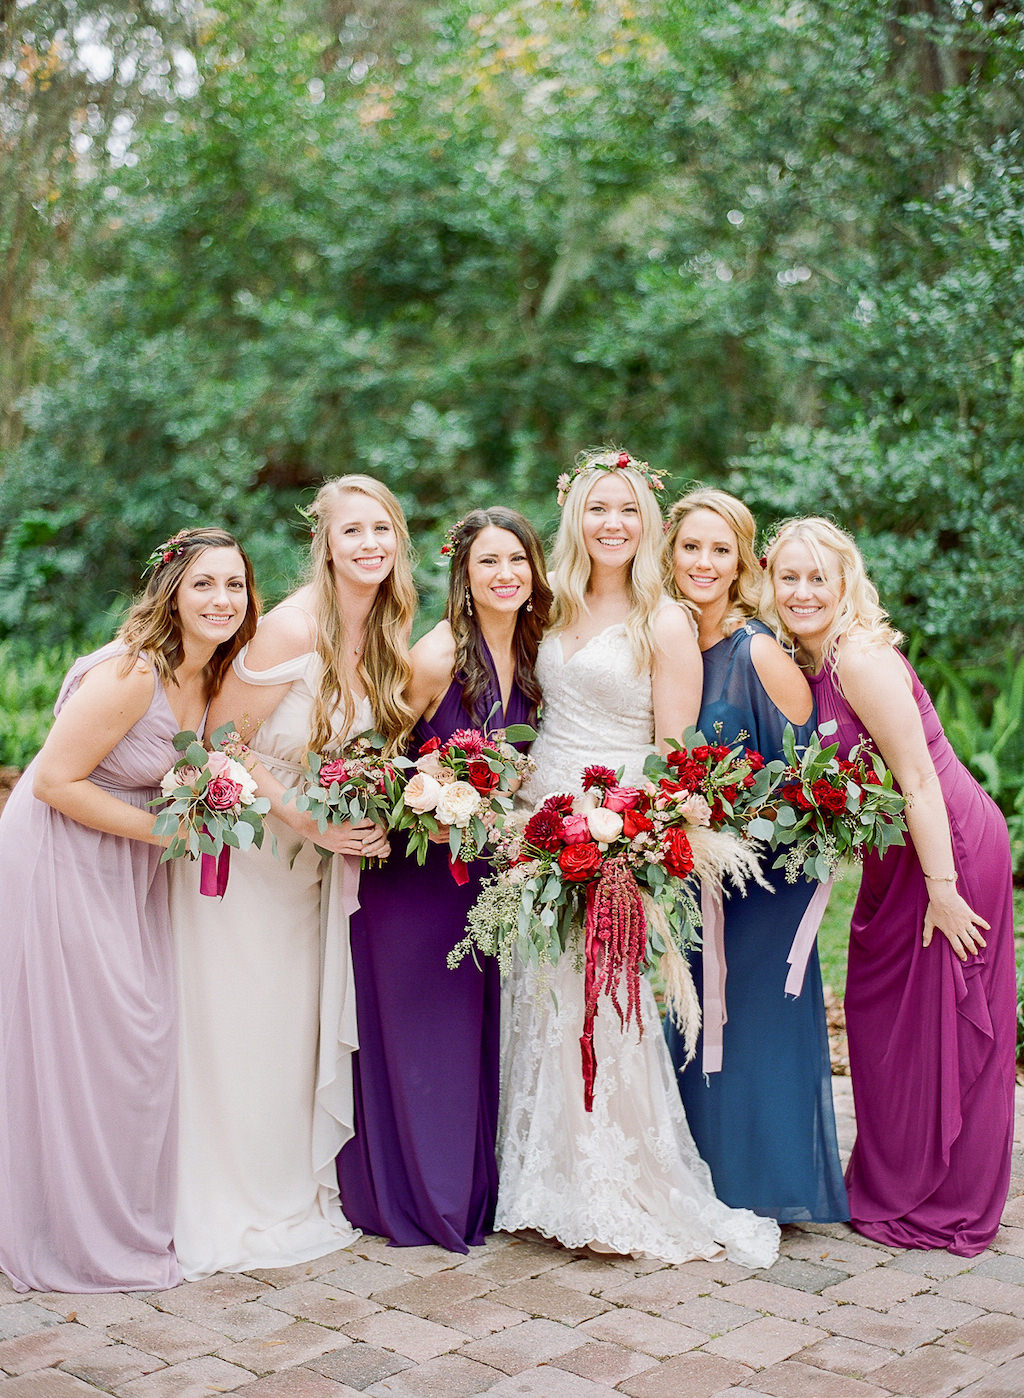 Outdoor Bride and Bridal Party Wedding Portrait, Bridesmaids in Mismatched Dresses, Bride in Fitted Lace Wedding Dress with Red, Pink, Ivory and Greenery Floral Bouquet | Tampa Bay Bridal Shop Nikkis Glitz and Glam Bridal Boutique